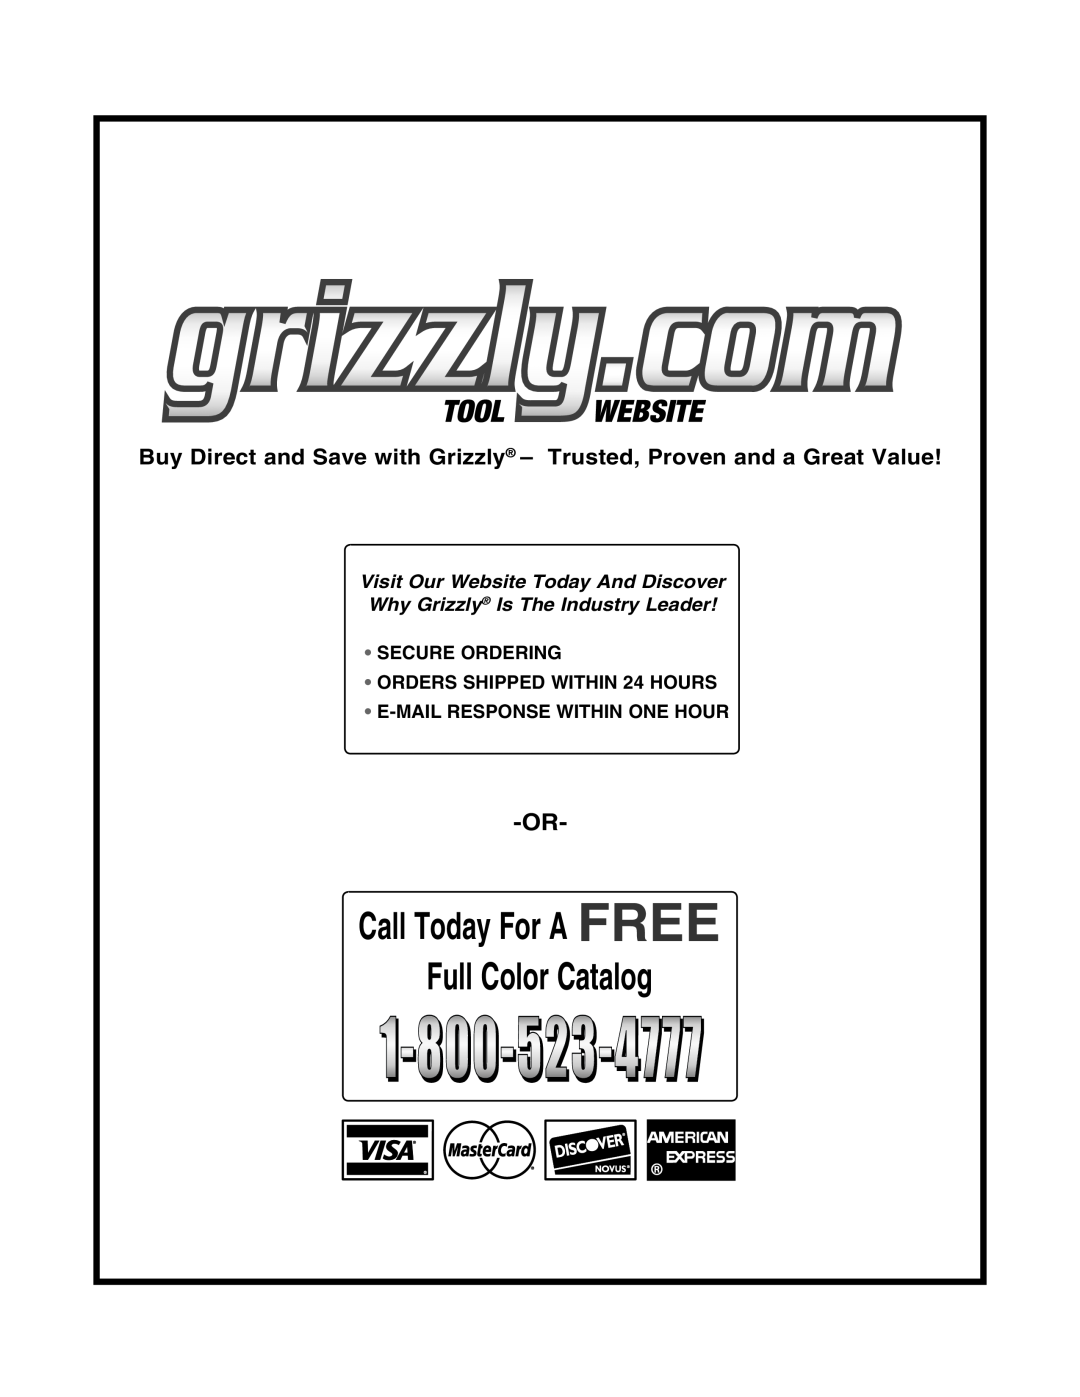 Grizzly T10050 specifications #ALL 4ODAYD&ORO! &2%%, s 3%#52% /2$%2, s /2$%23 300%$074.  /523, s %-!,2%30/.3%274. /.%./52 